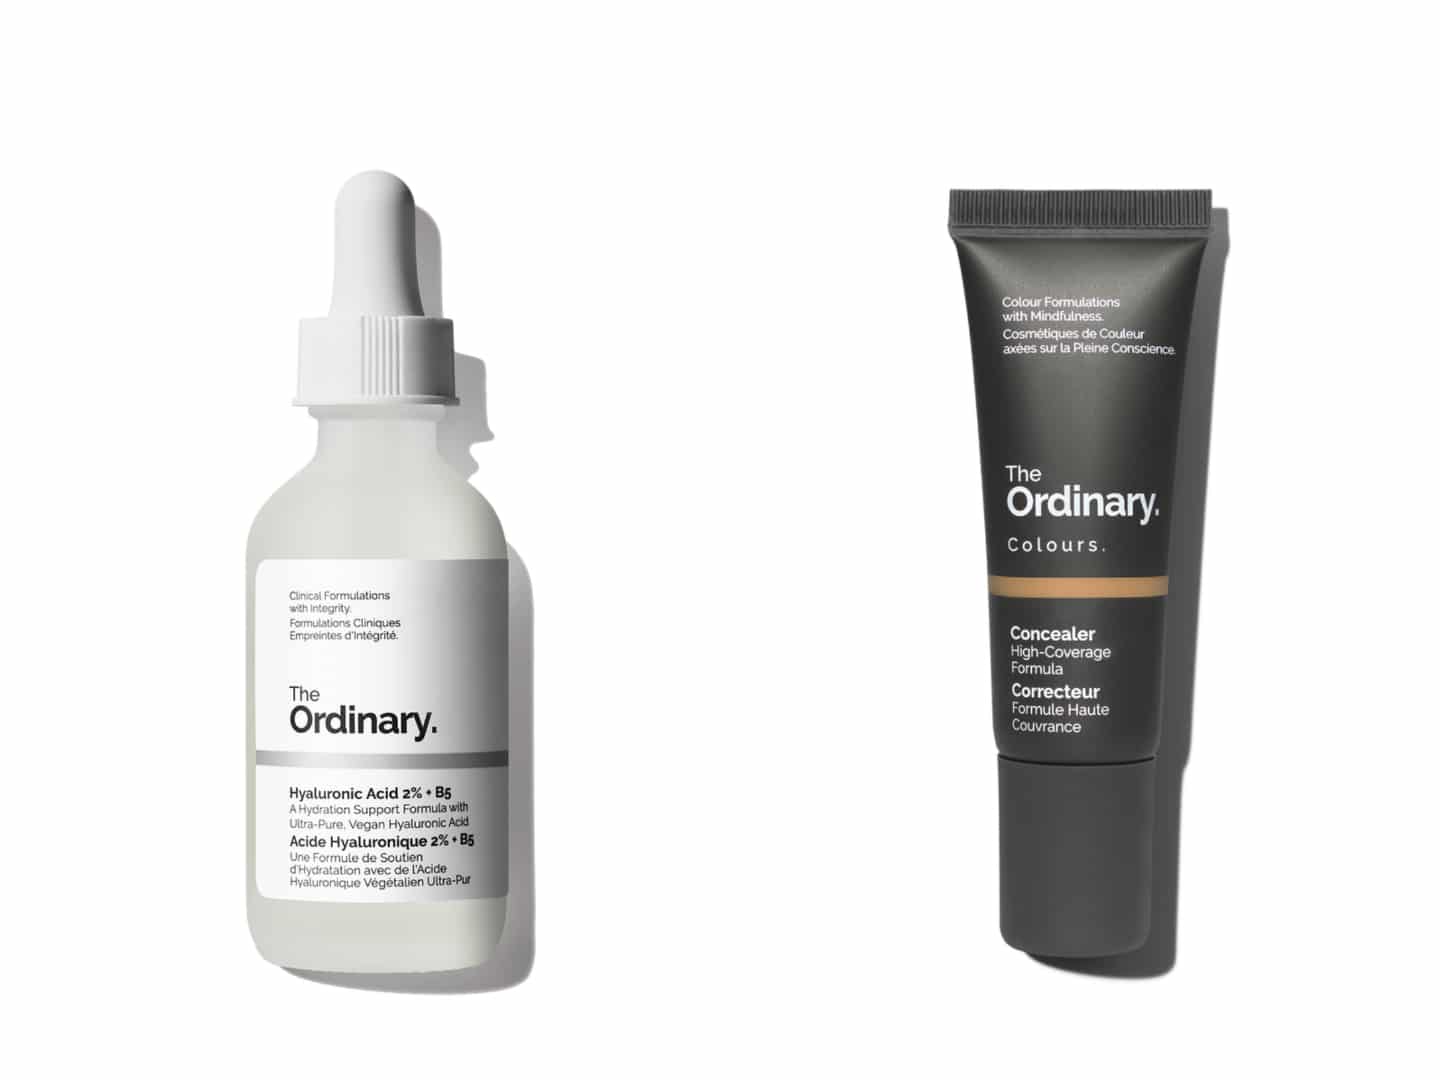 Fans of the brand can get discounts on The Ordinary Hyaluronic Acid 2% + B5 and Concealer.